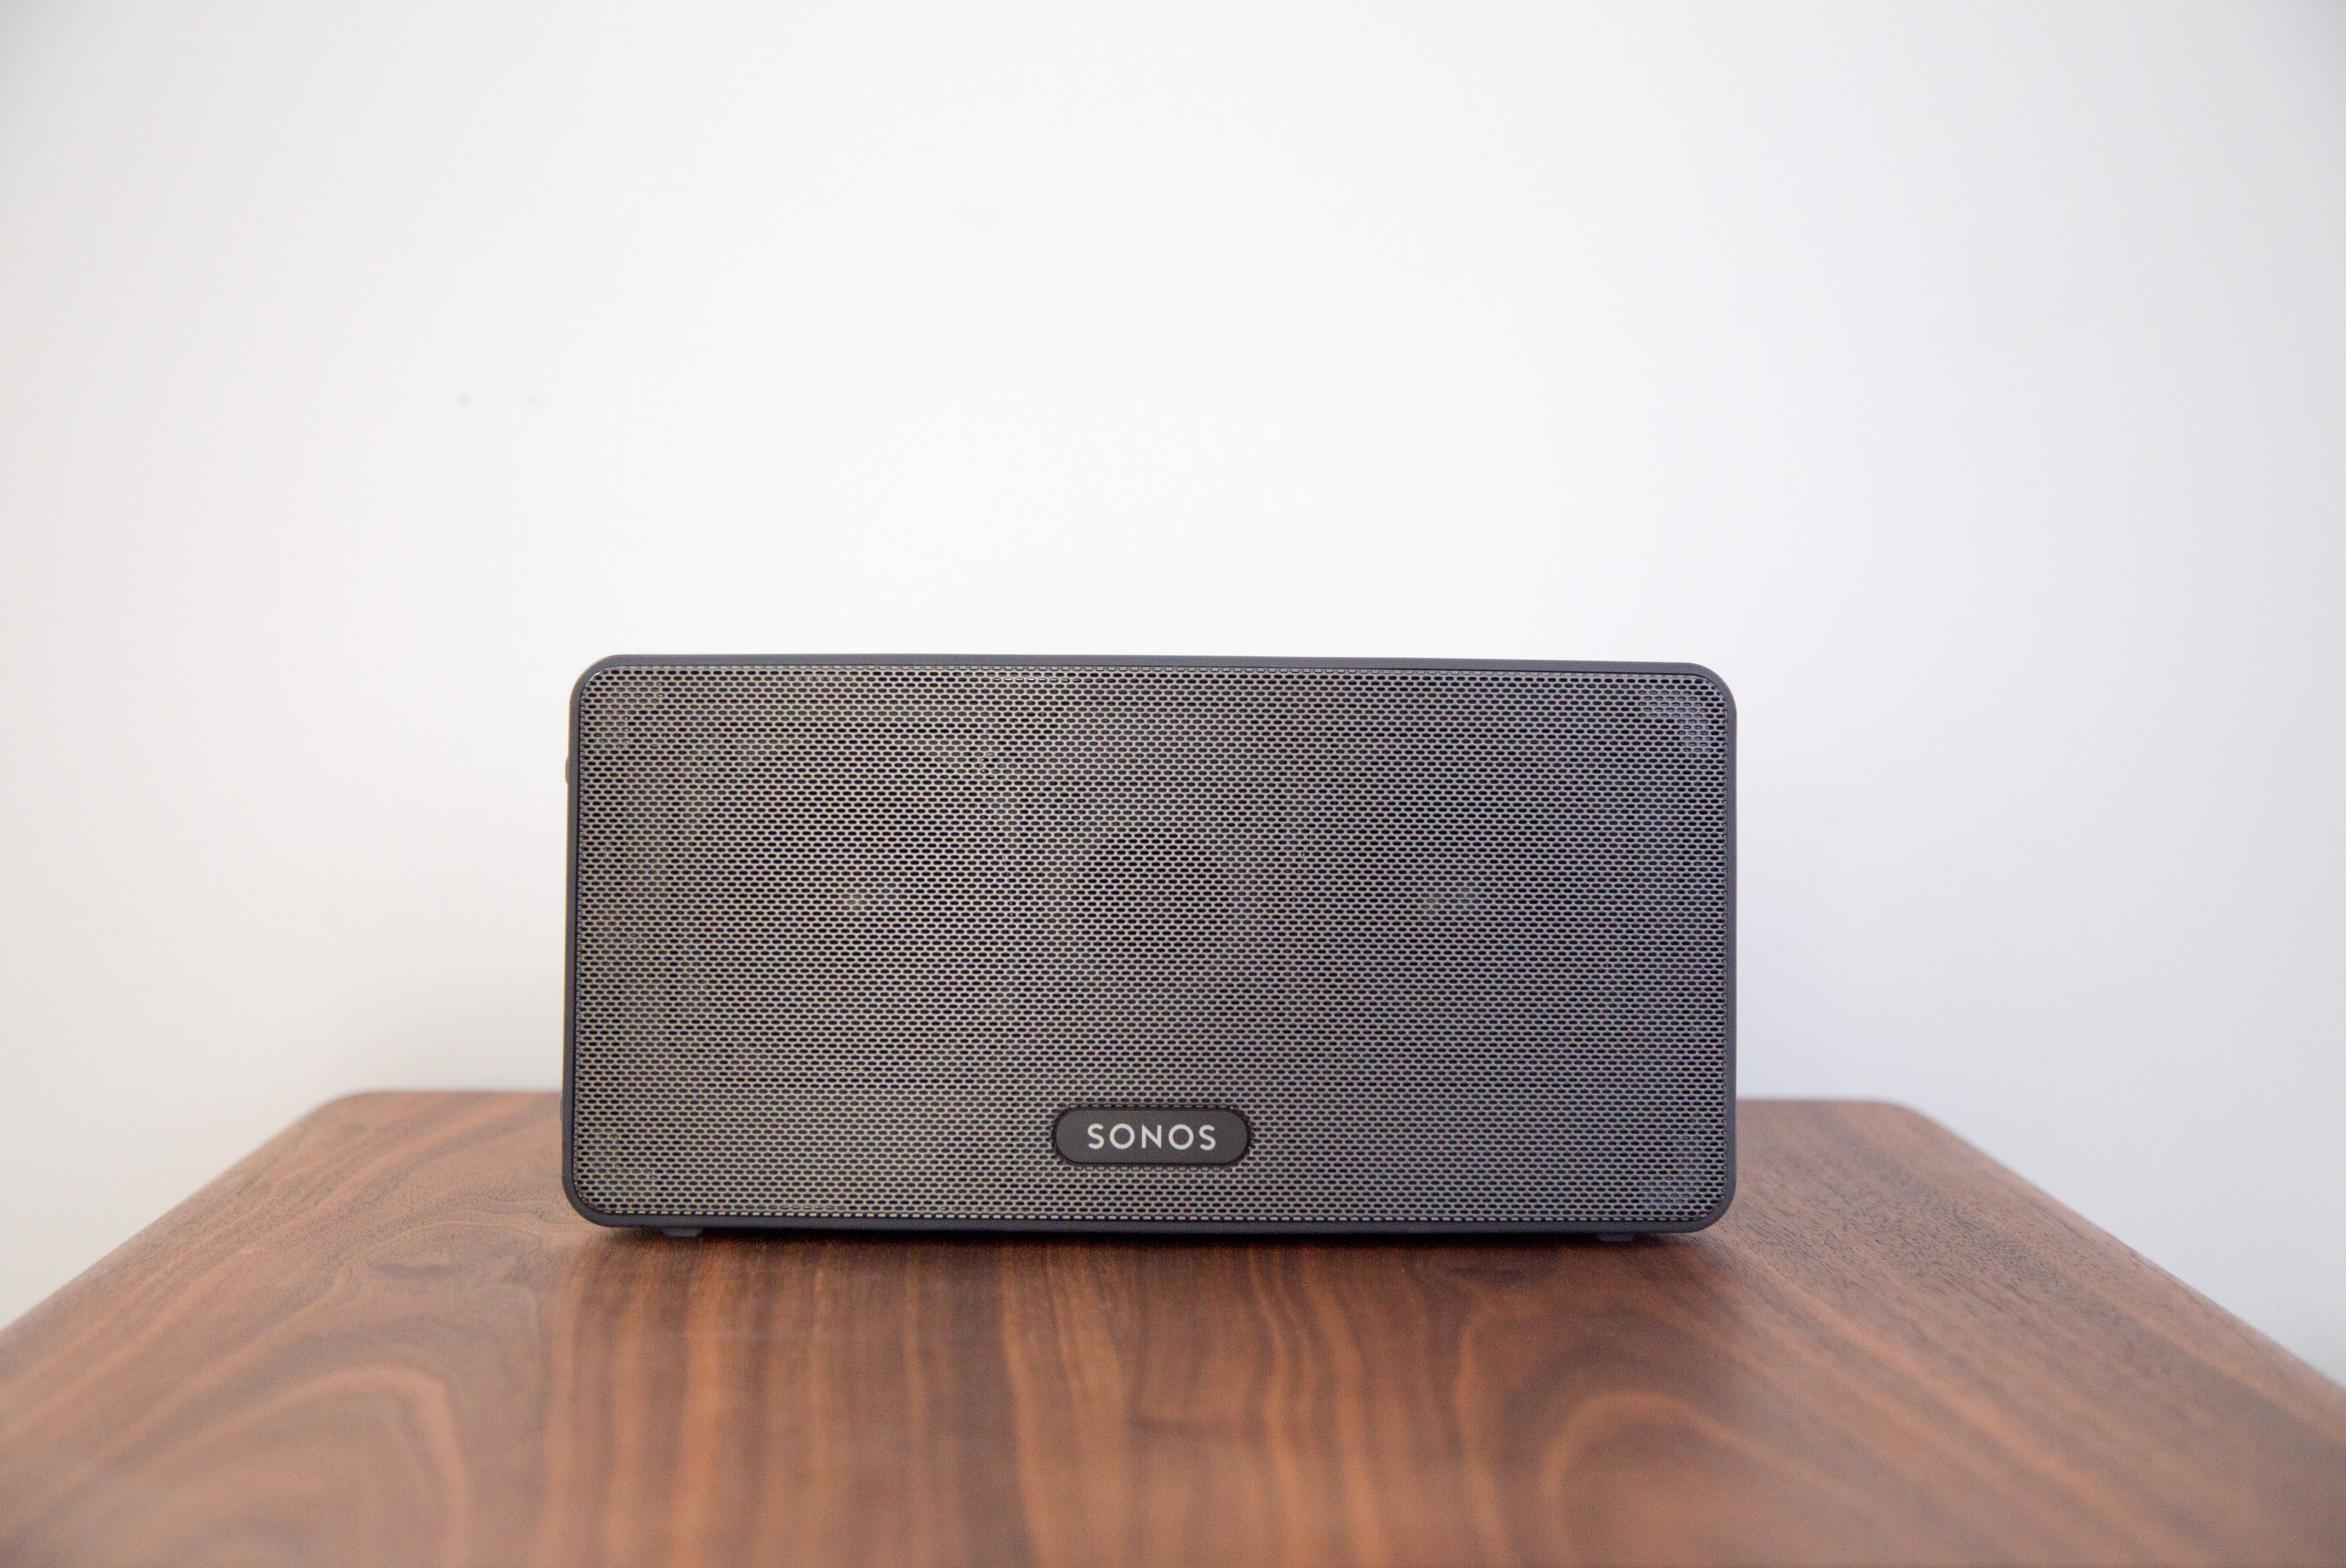 Spiritus Claire skærm Sonos clarifies how unsupported devices will be treated | TechCrunch